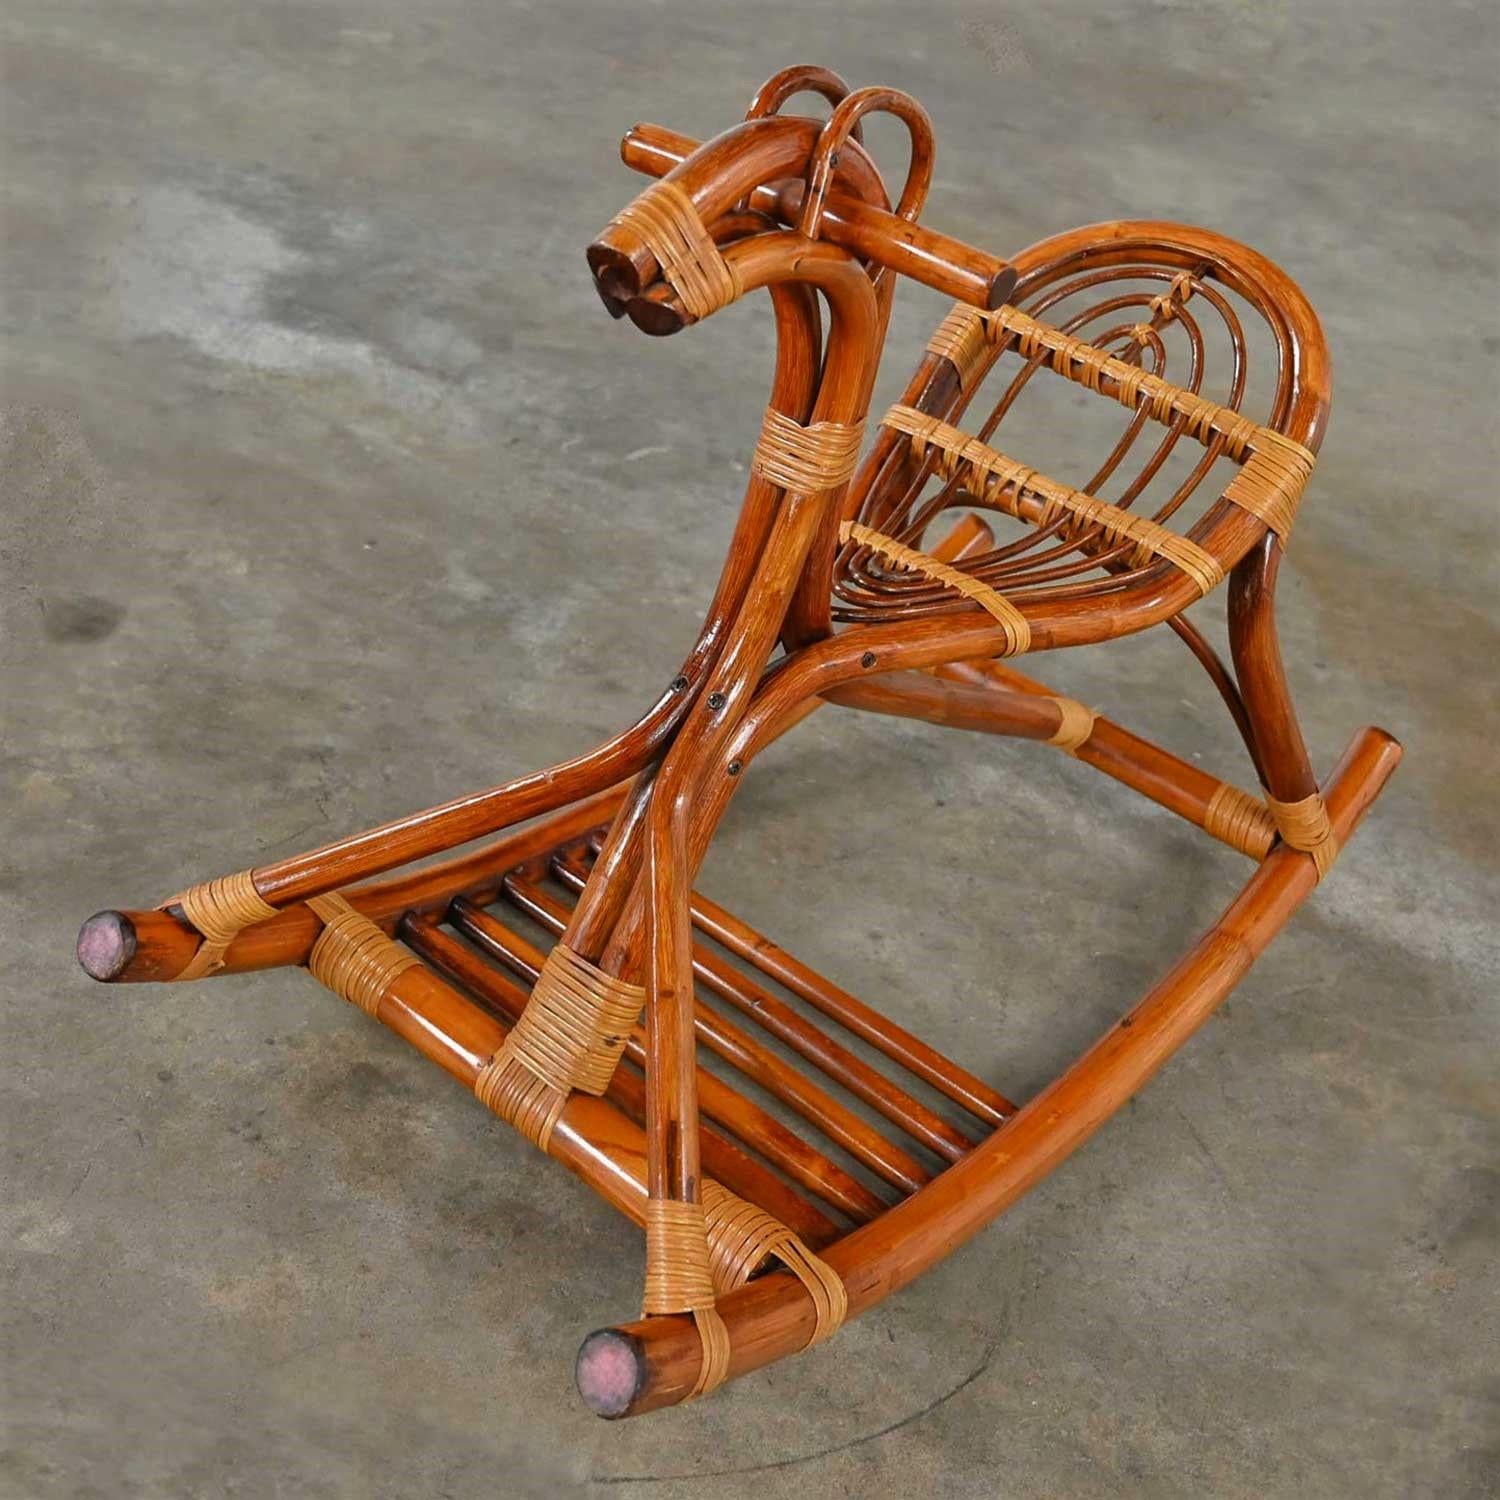 Wonderful Mid-Century Modern stylized rattan rocking horse in lovely condition, keeping in mind that this is vintage so will show signs of wear and use. There are no noticeable flaws that we have detected. Please see photos and zoom in for details.